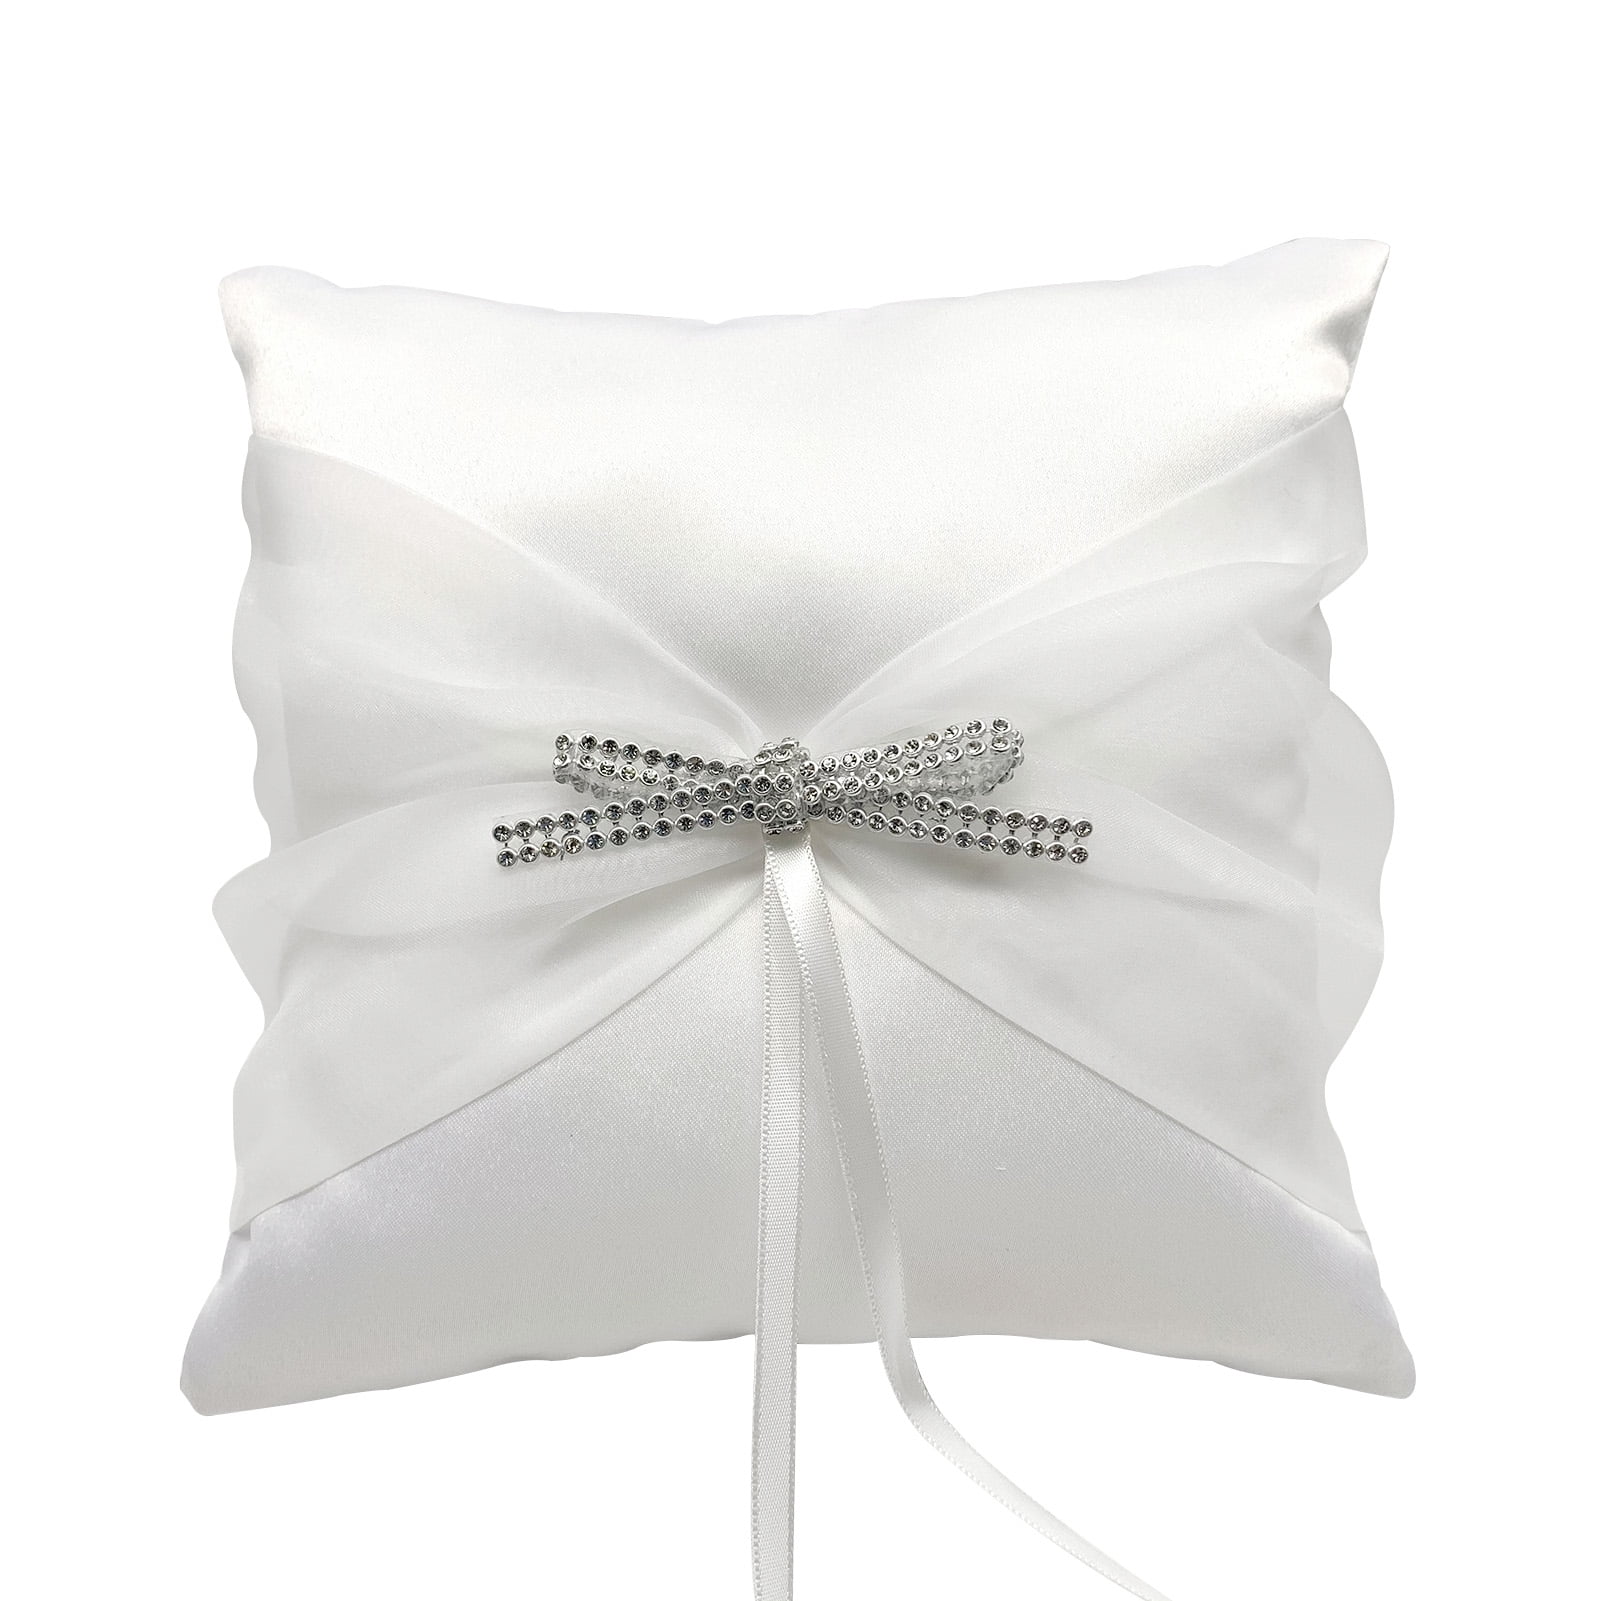 New 20cm White Wedding Ring Pillow Bearer with Rhinestone Ribbon Bow Party Decor 